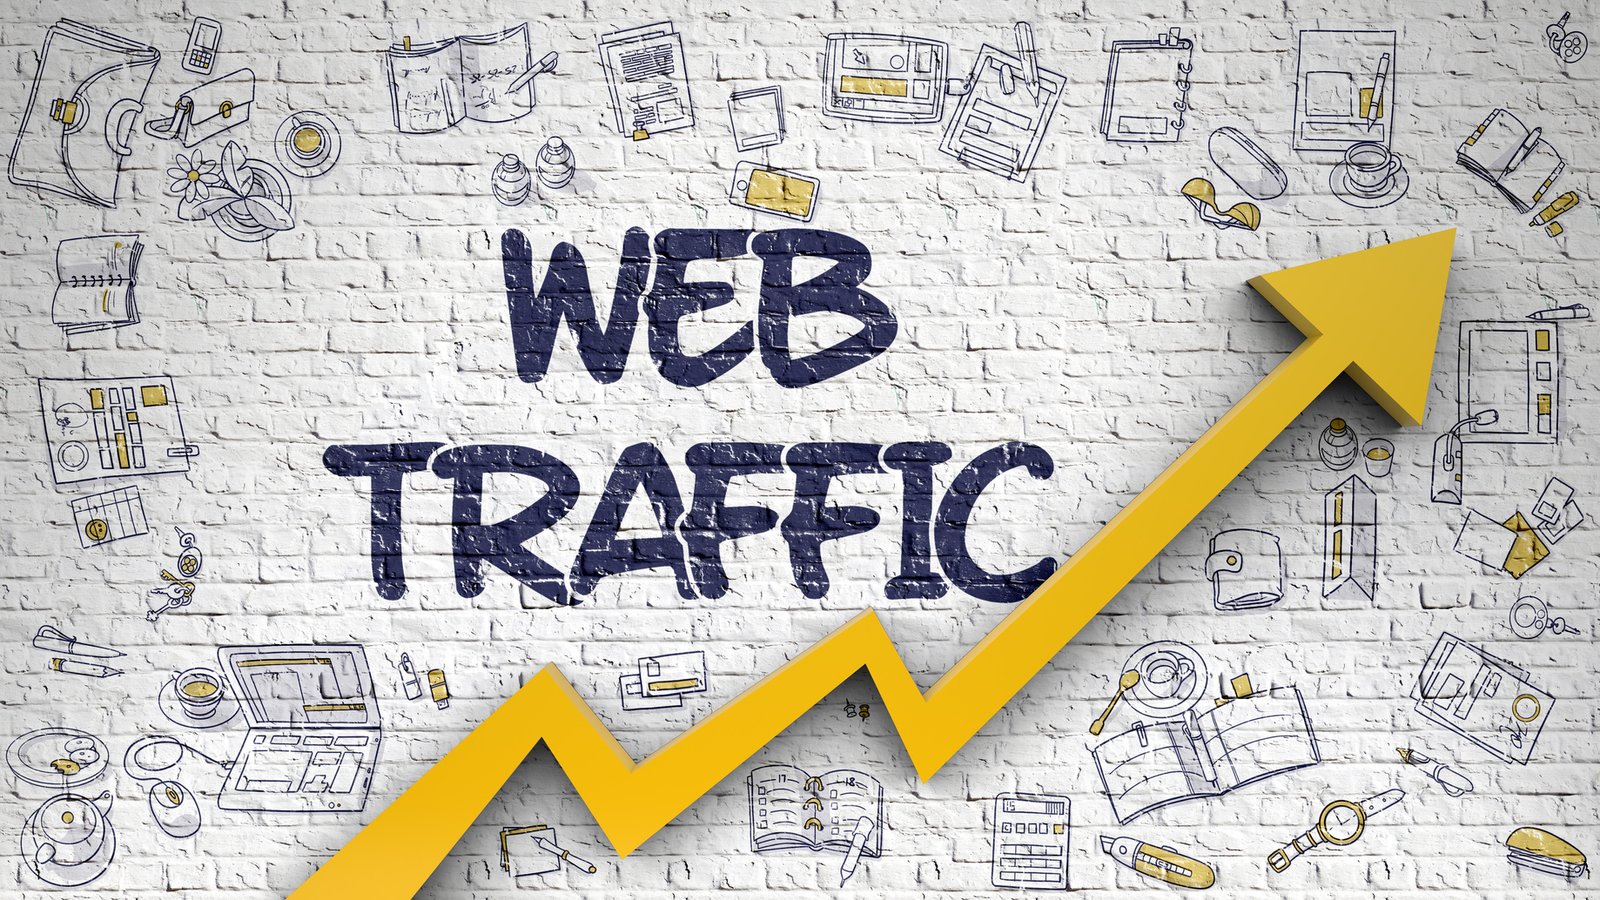 IMPROVE YOUR WEBSITE TRAFFIC WITH SOCIAL MEDIA STRATEGIES